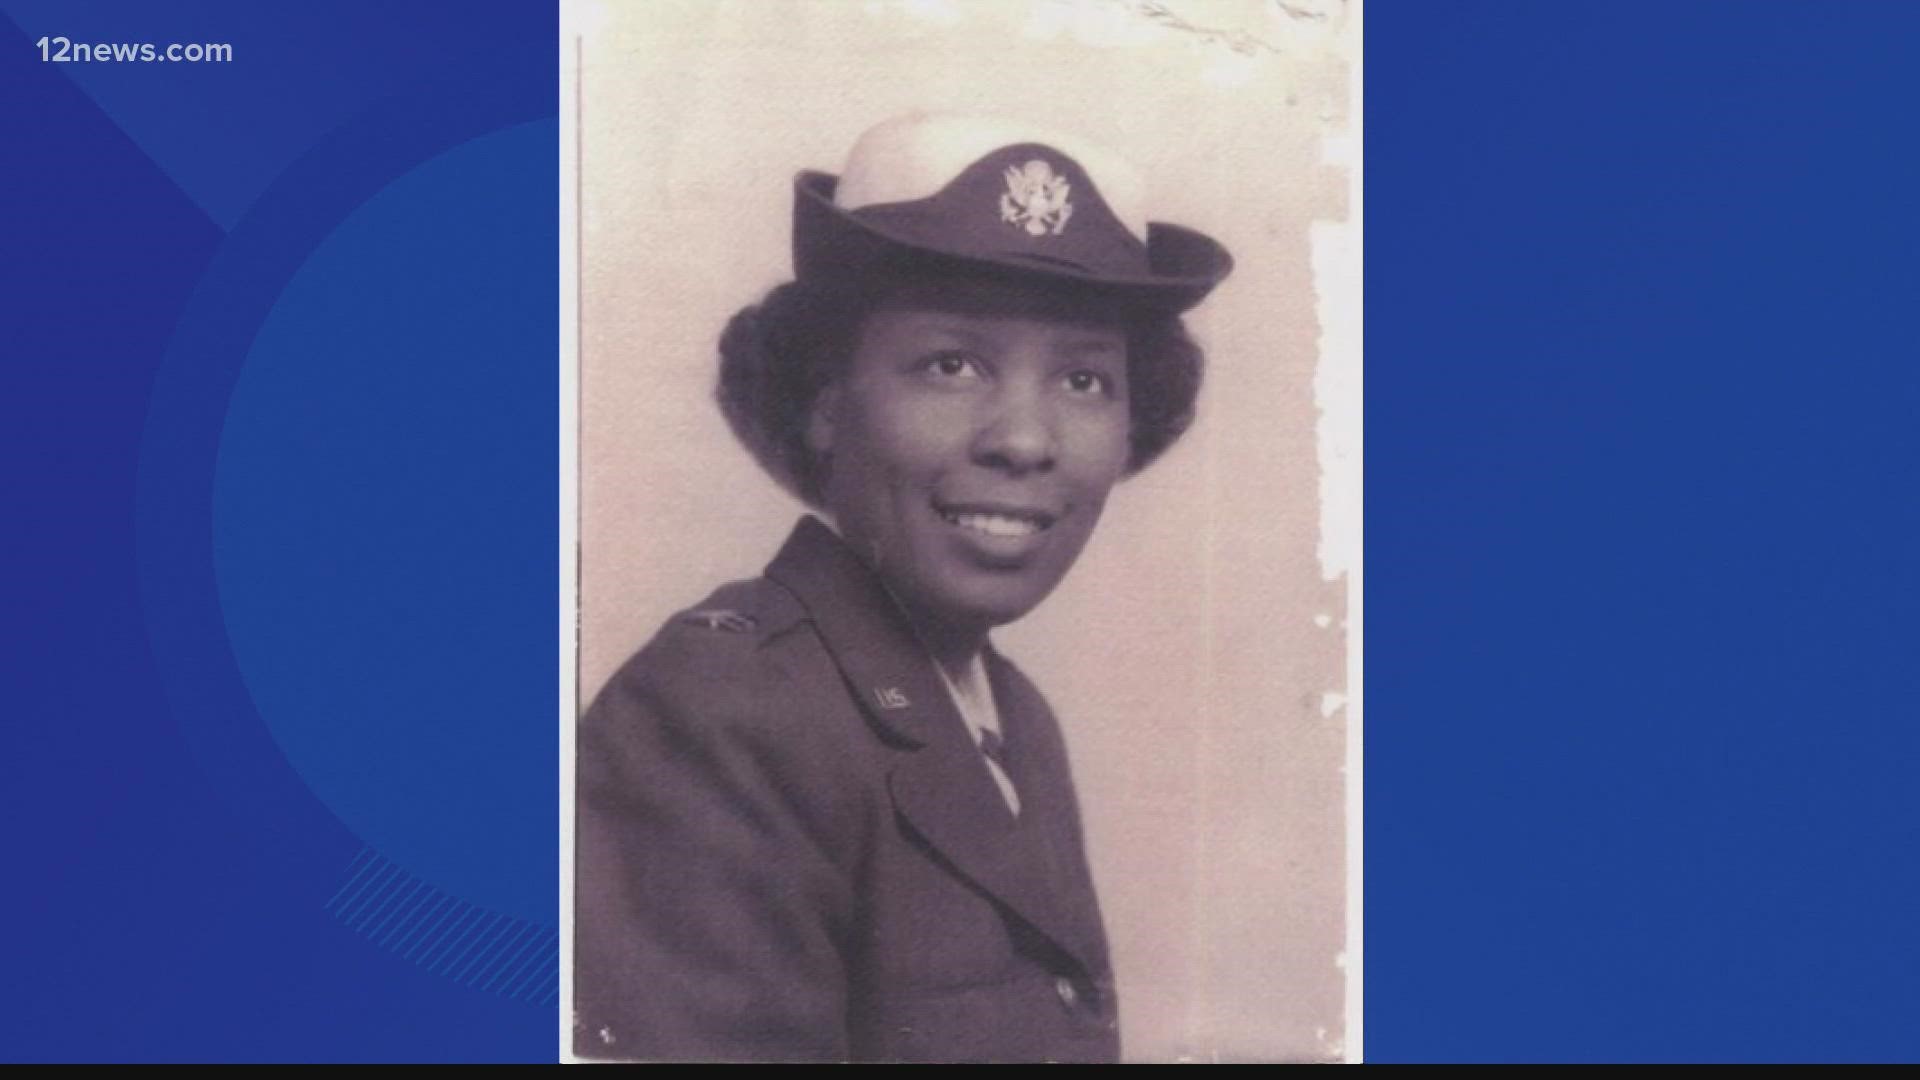 Major Fannie Griffin McClendon is an icon. The 101-year-old veteran of WWII was part of a unit made up of Black women assigned to fix the mail system in Europe.